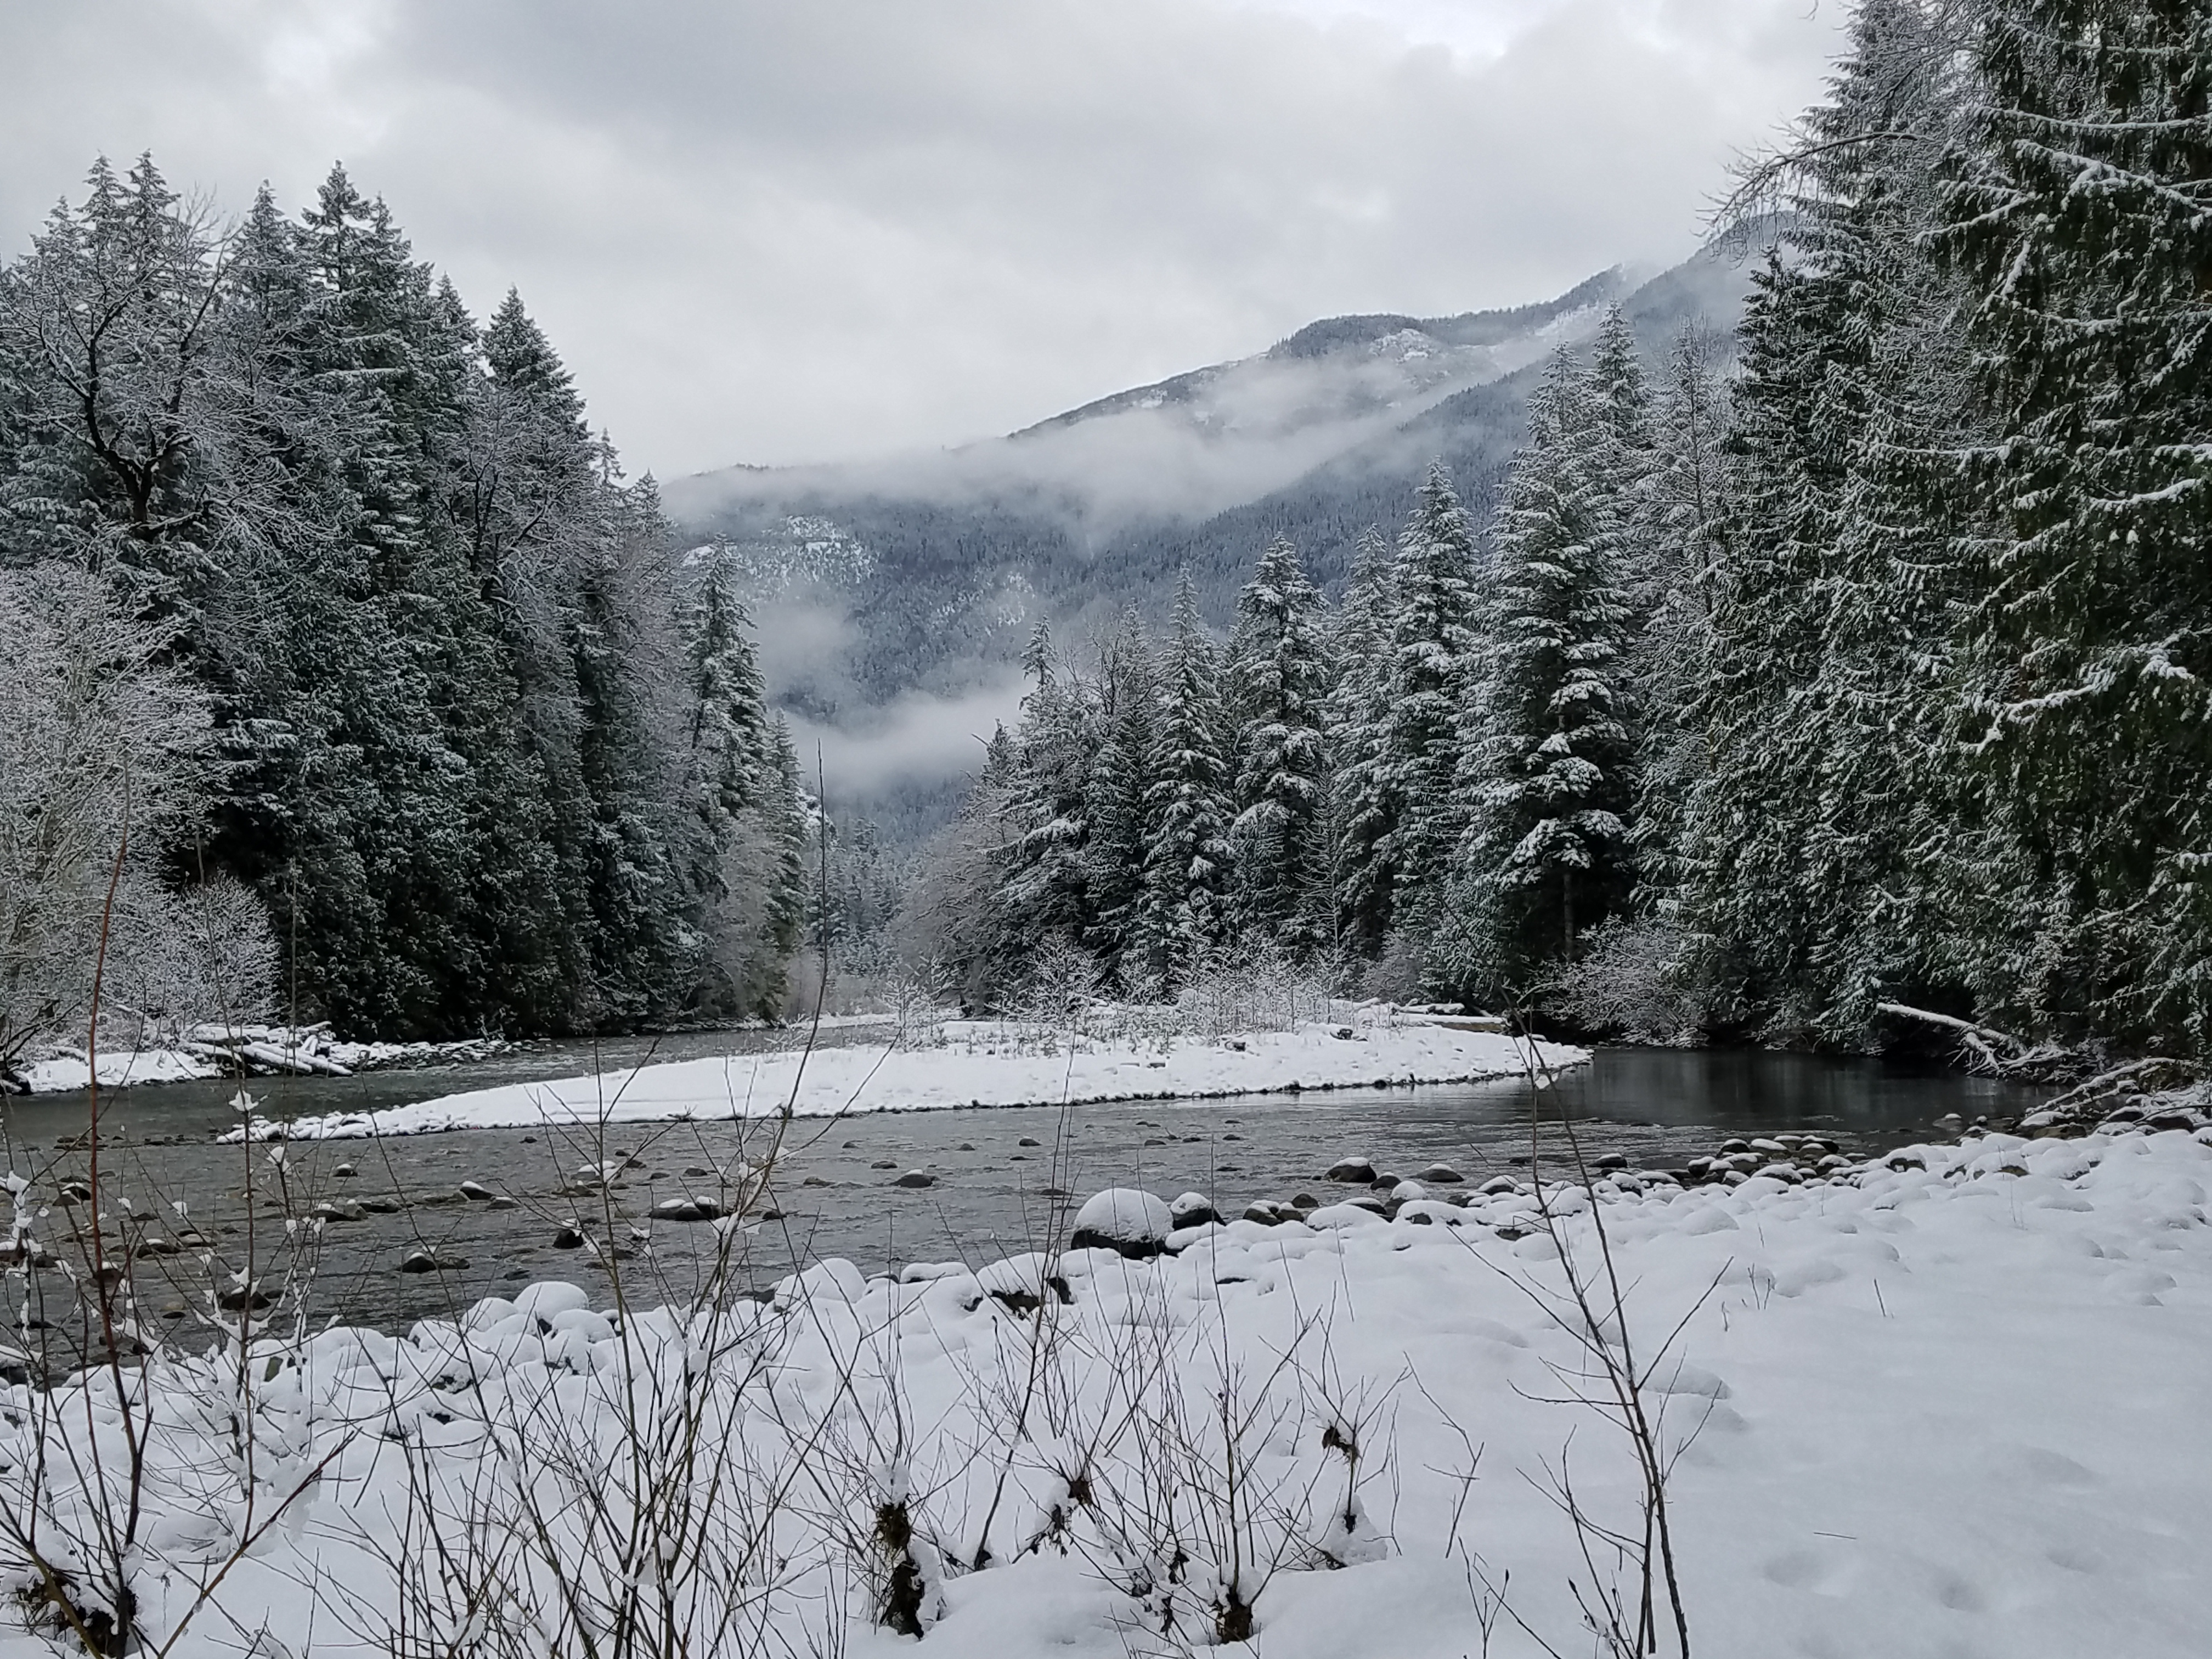 The Cascade River is a tributary of the Skagit River and drains mountains in North Cascades National Park. Photograph credit: Skagit Land Trust staff.